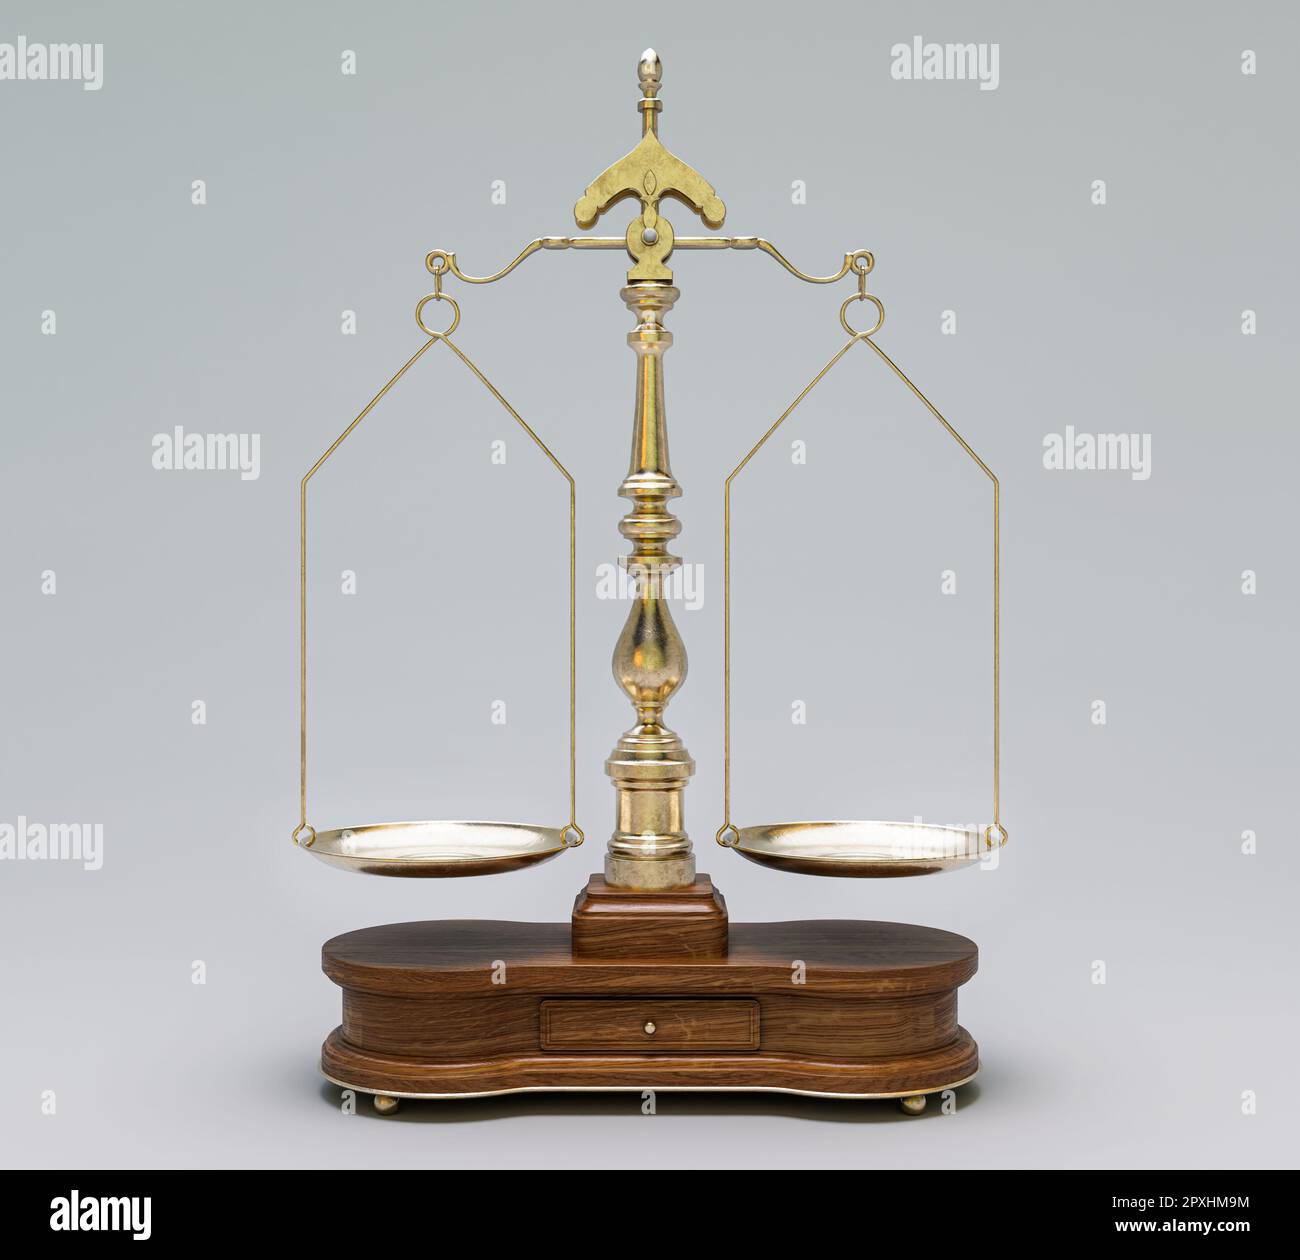 https://c8.alamy.com/comp/2PXHM9M/ornate-brass-justice-scales-with-a-wooden-base-on-a-white-isolated-background-3d-render-2PXHM9M.jpg